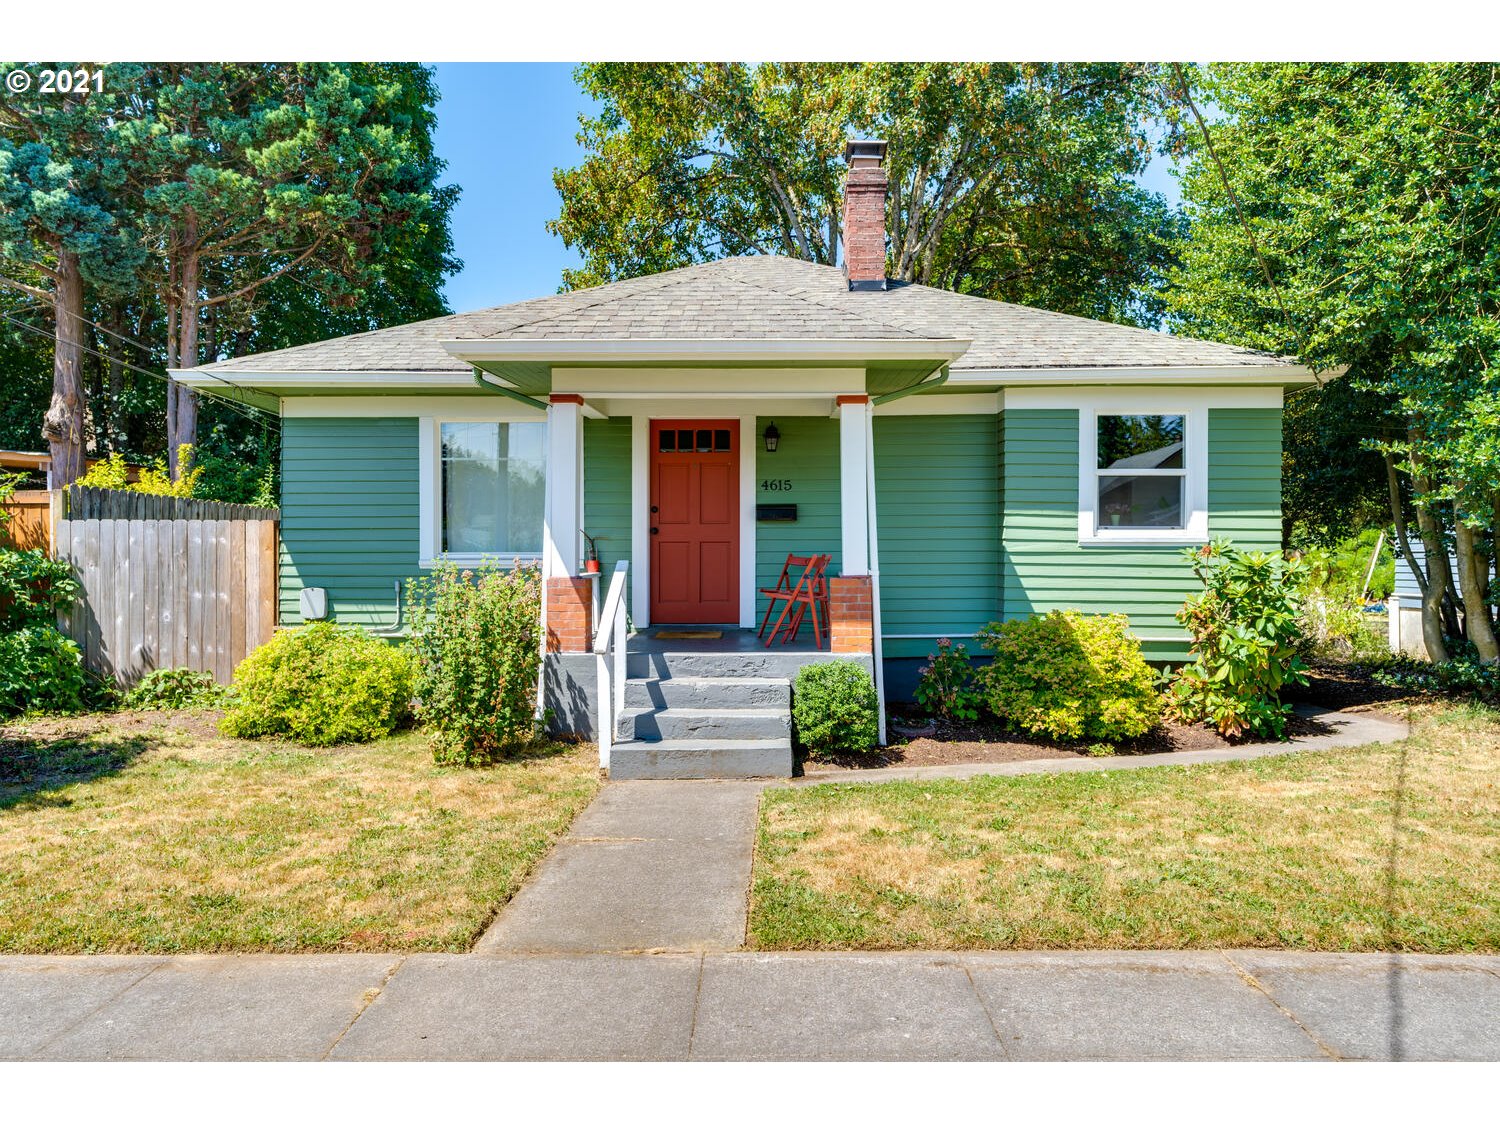 4615 SE 36TH AVE (1 of 14)